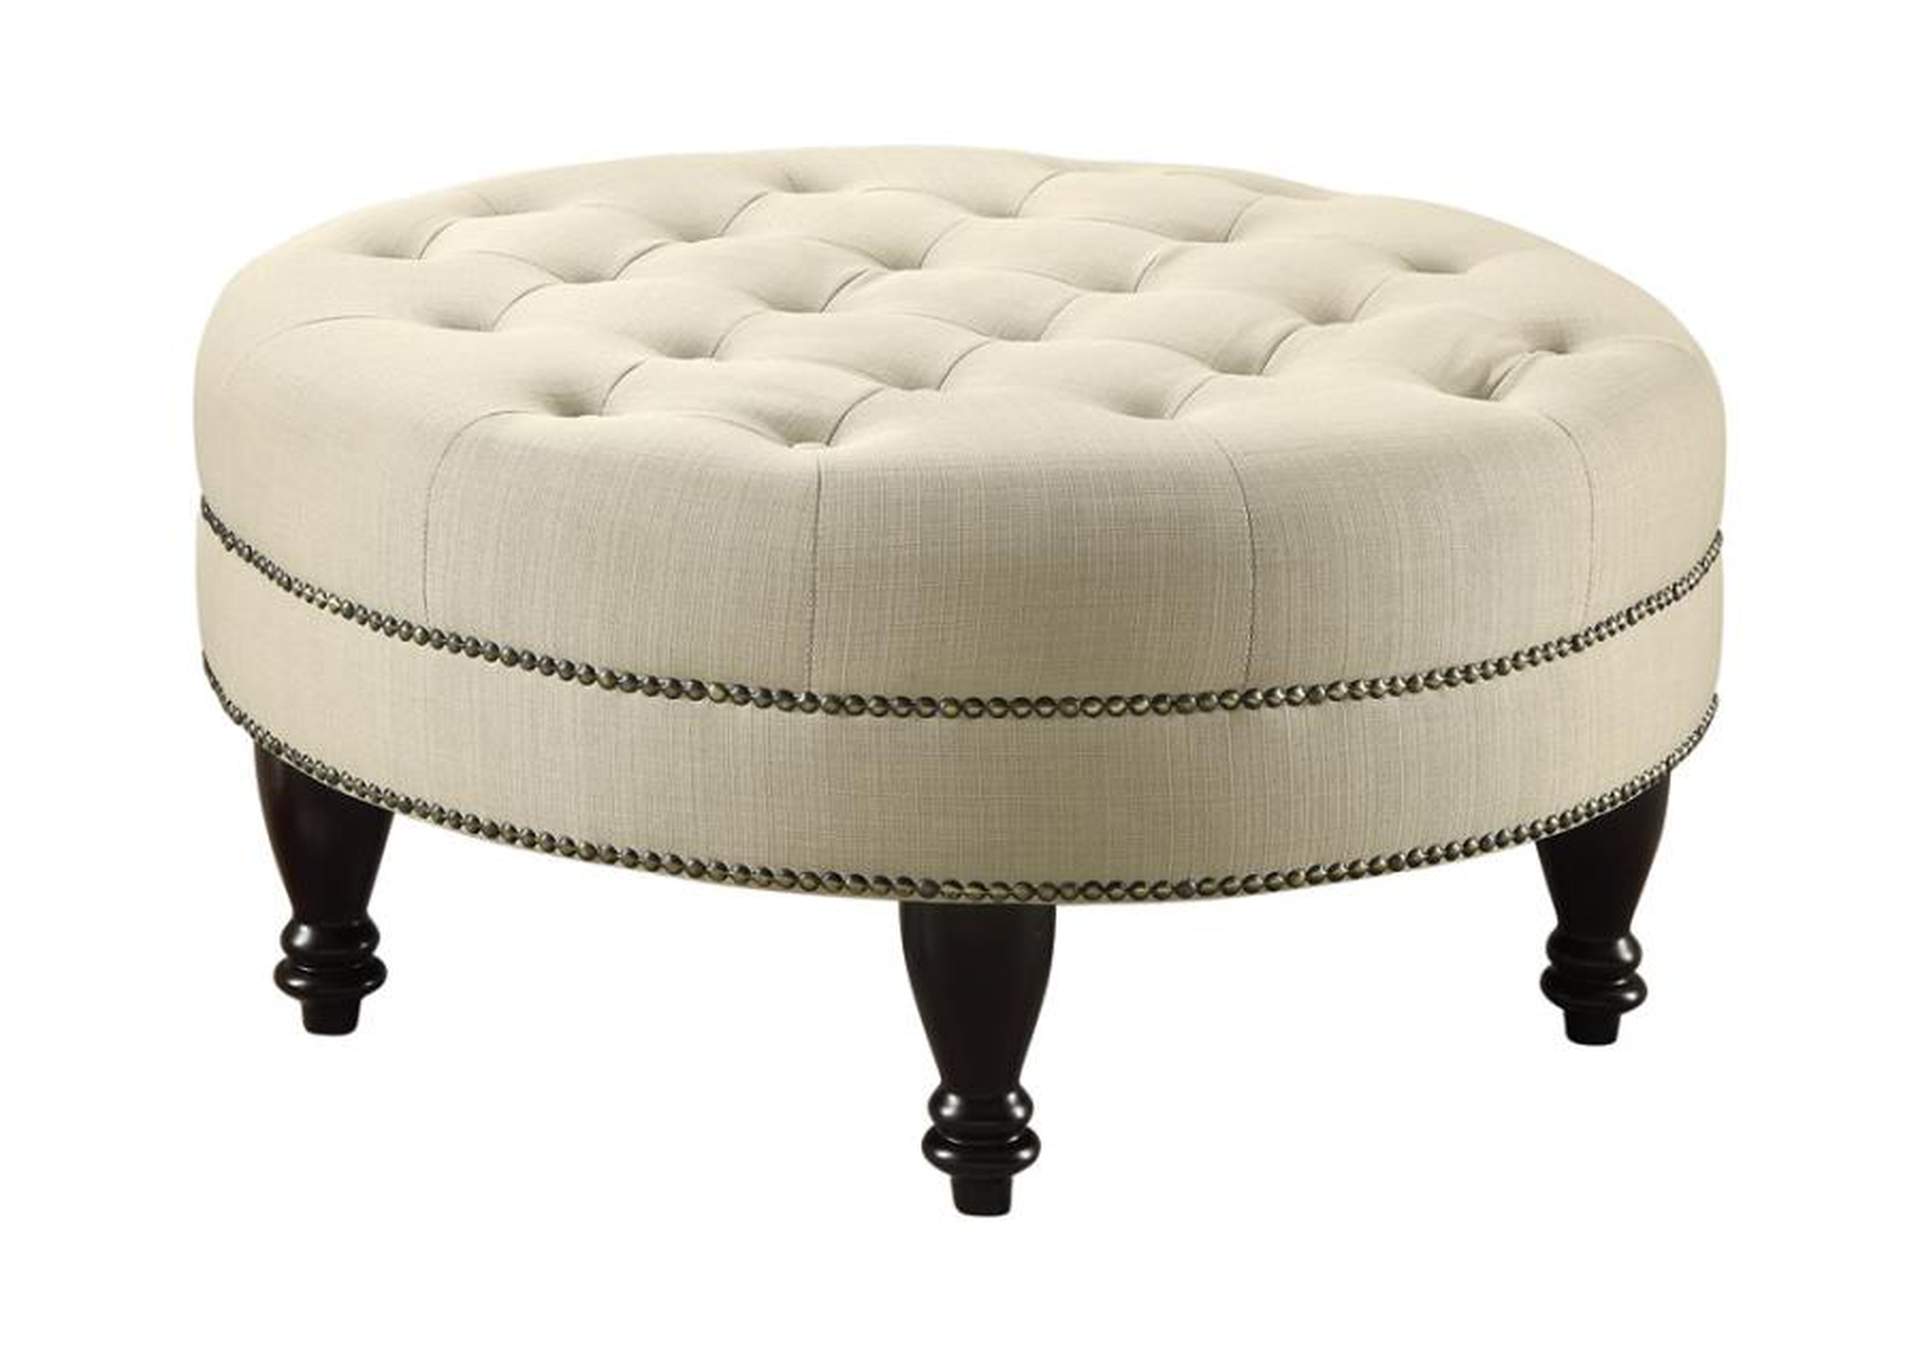 Elchin Round Upholstered Tufted Ottoman Oatmeal,Coaster Furniture